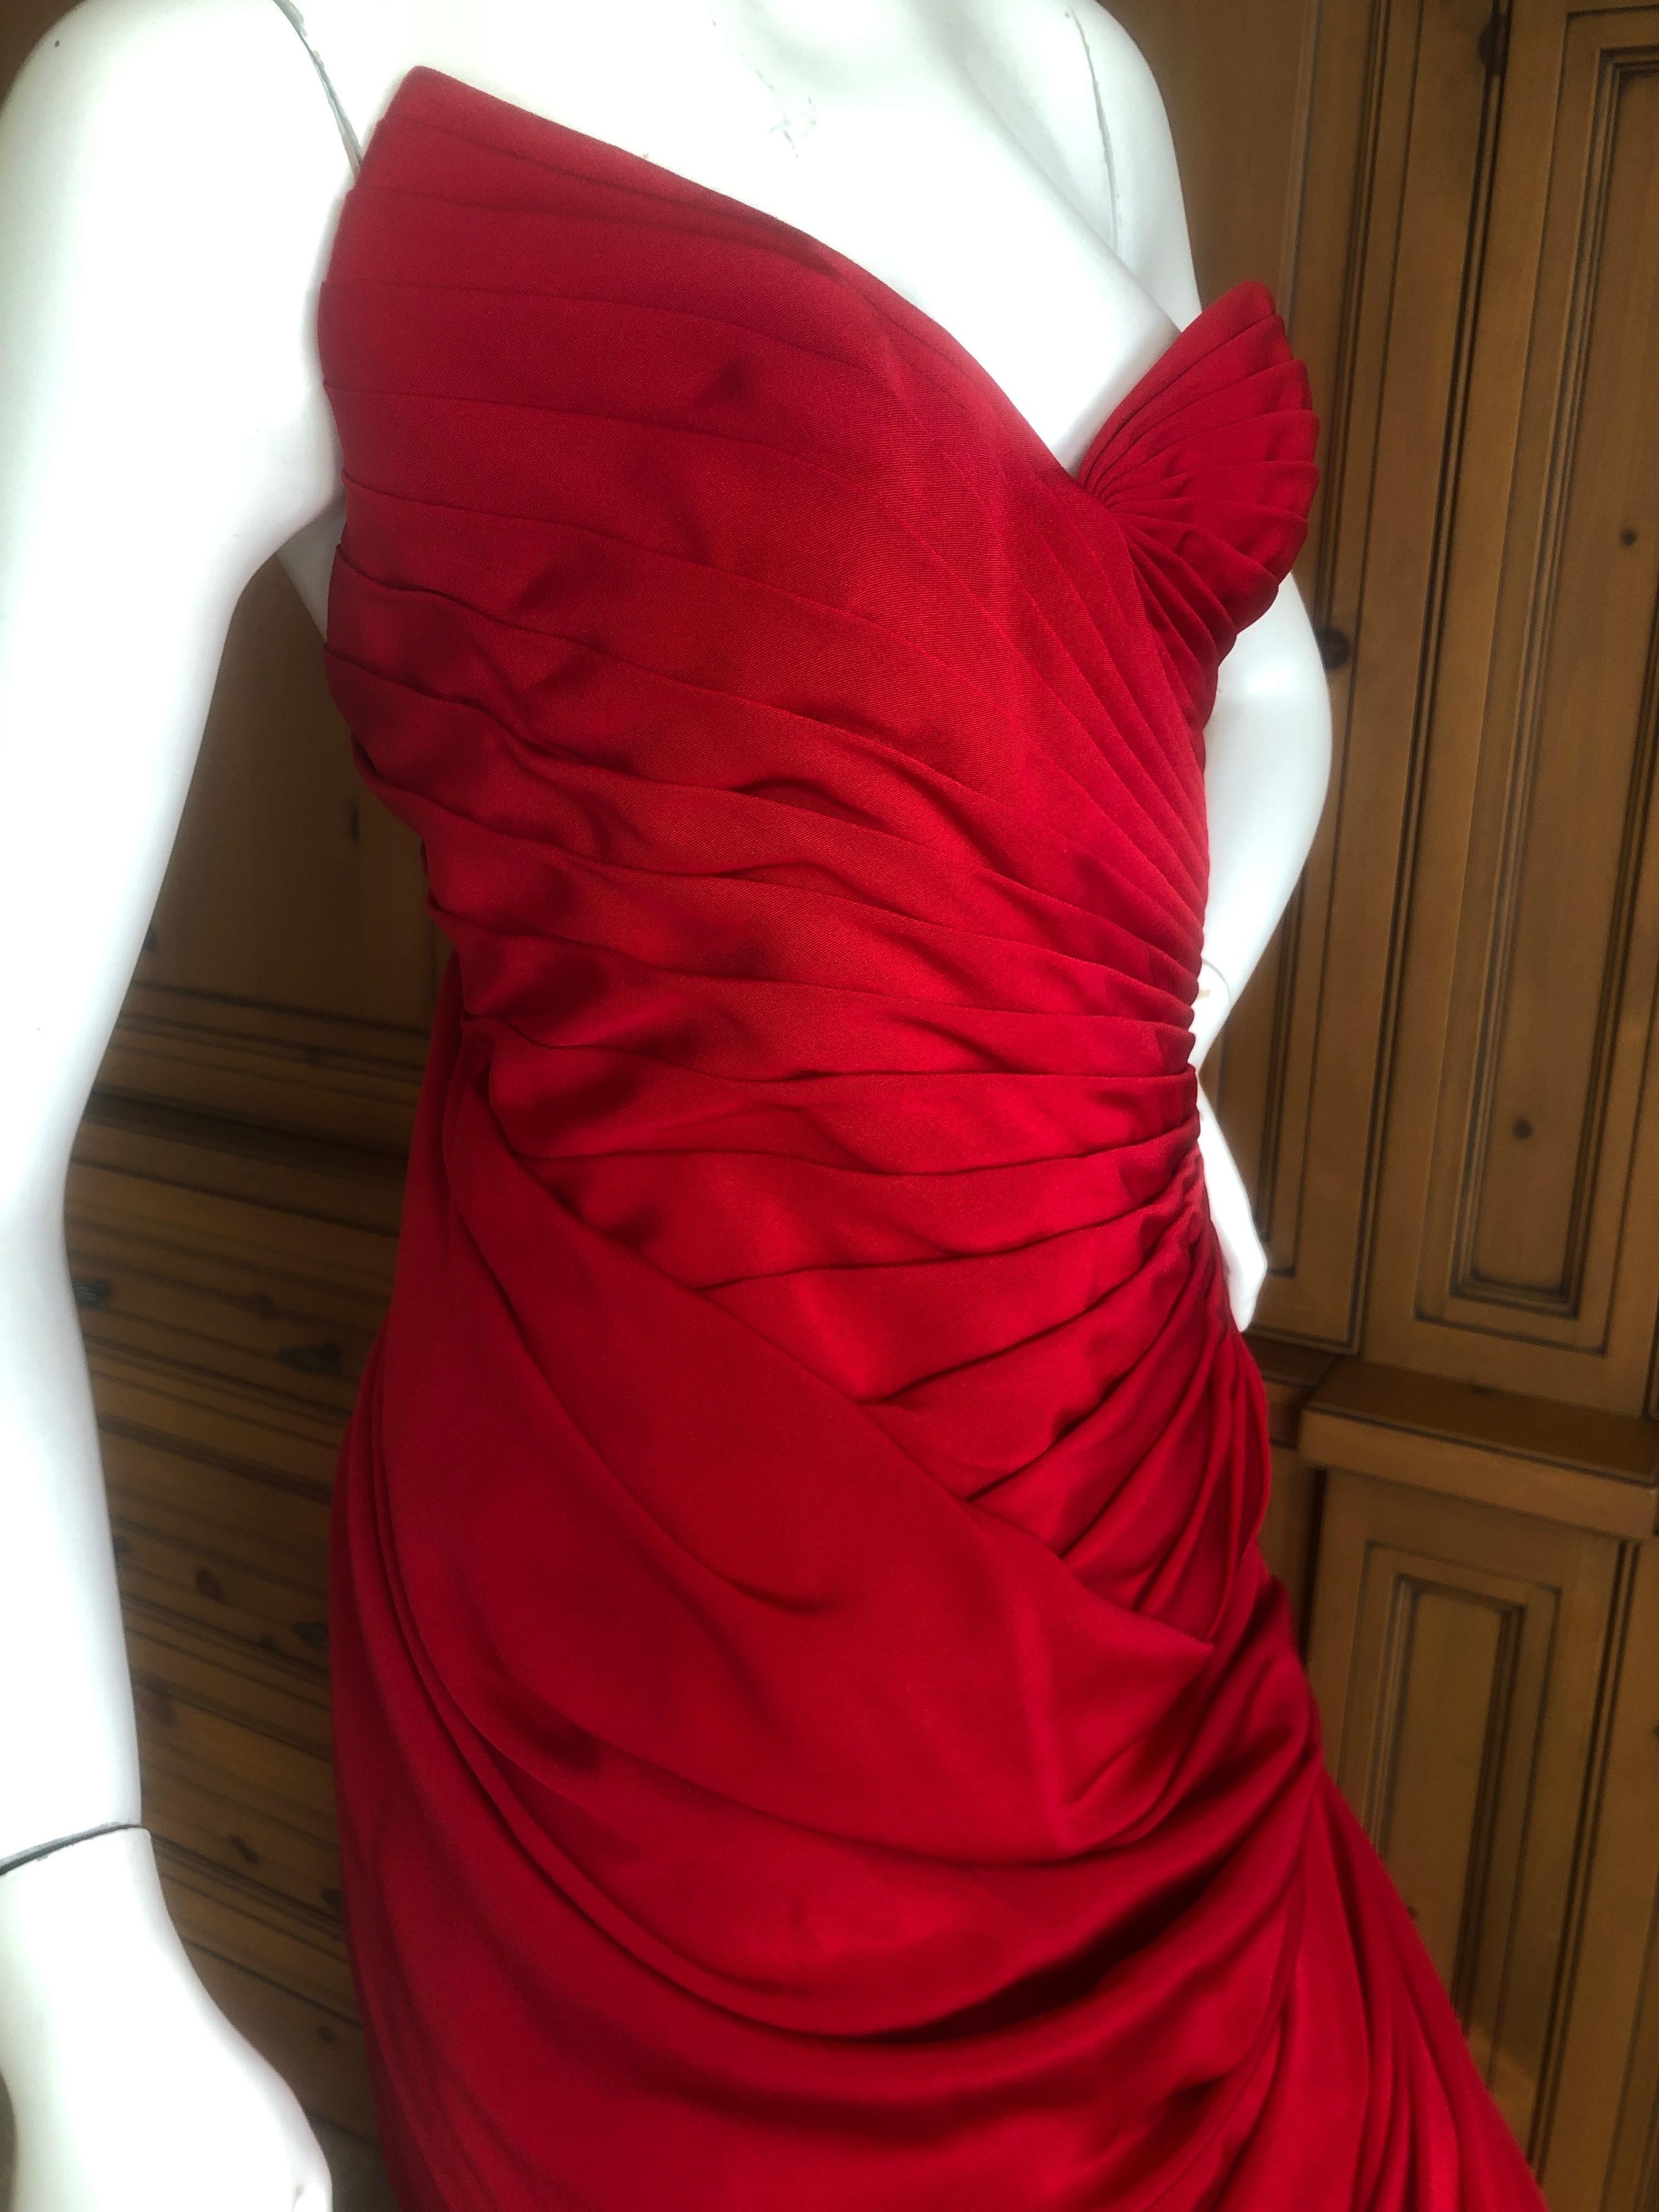 Emanuel Ungaro Numbered Haute Couture Fall 1984 Red  Strapless Evening Dress For Sale 8